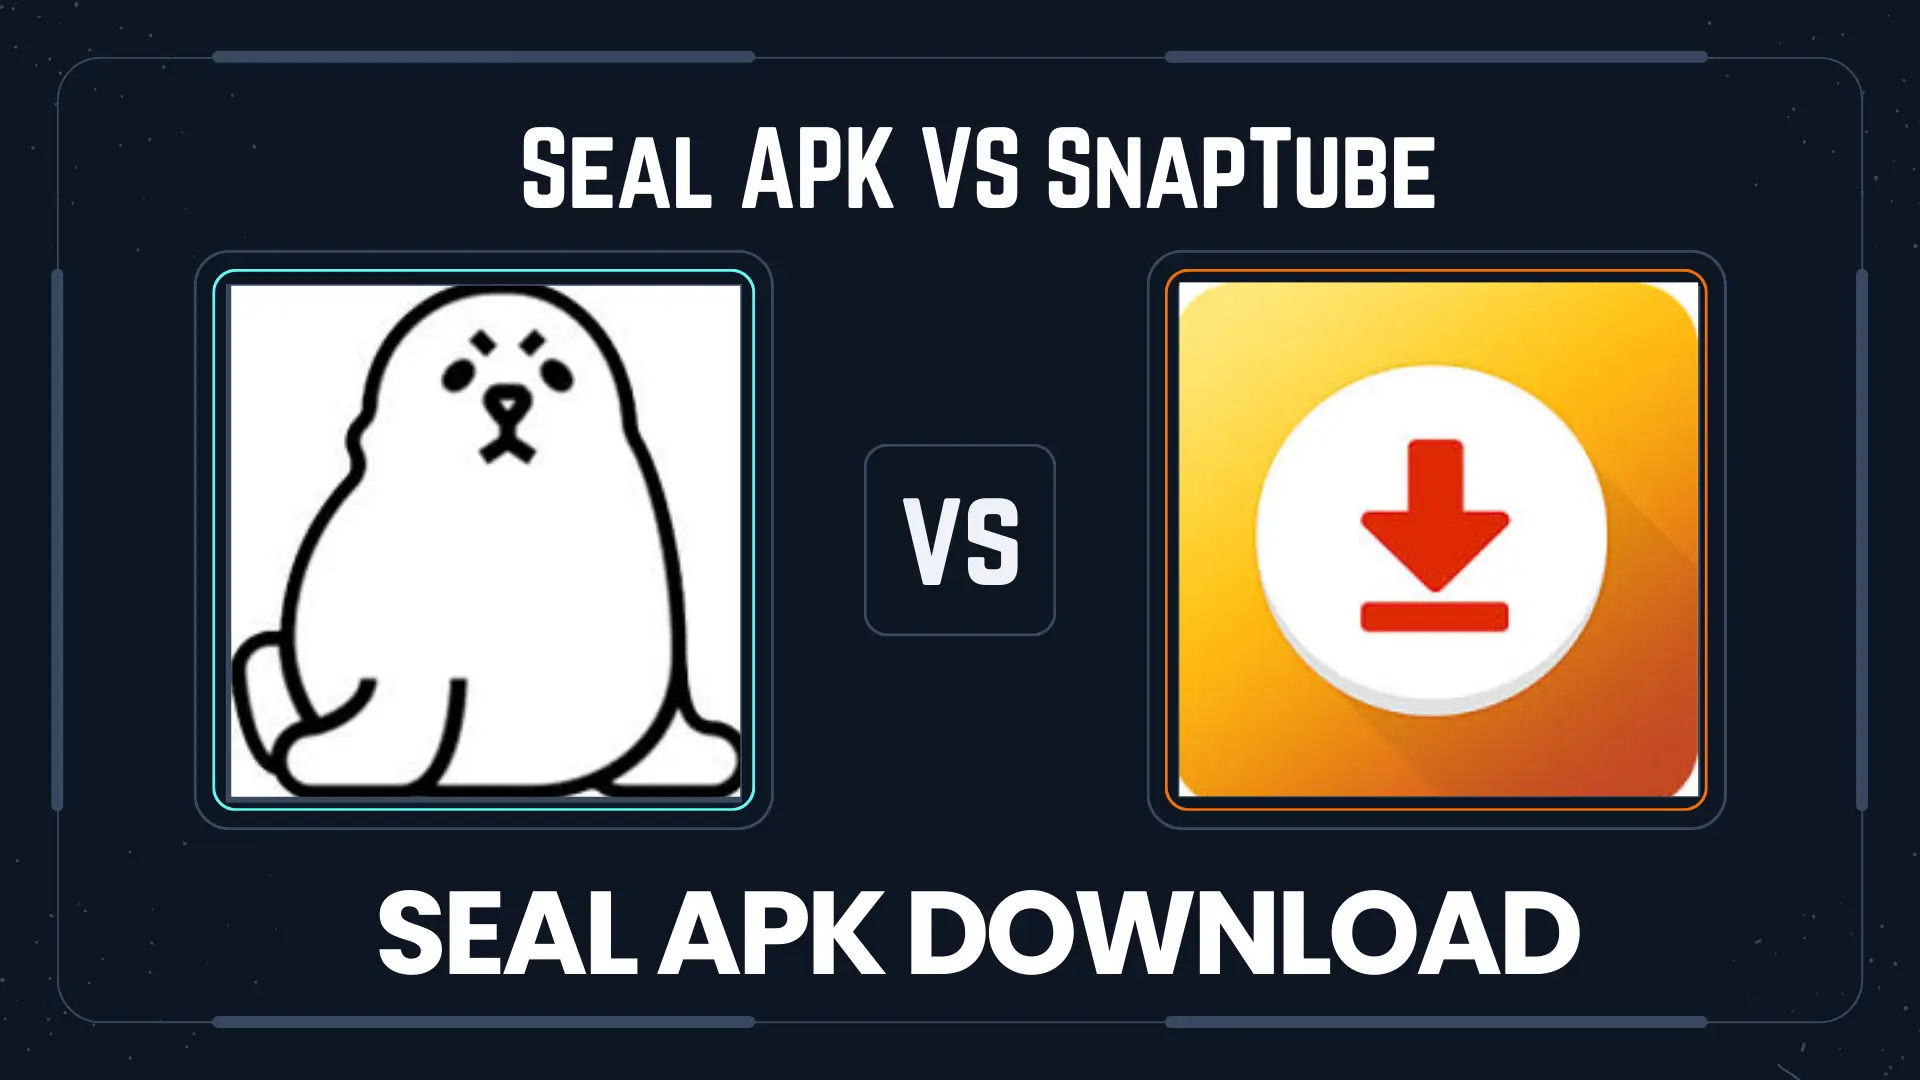 Seal apk comparision with snaptube